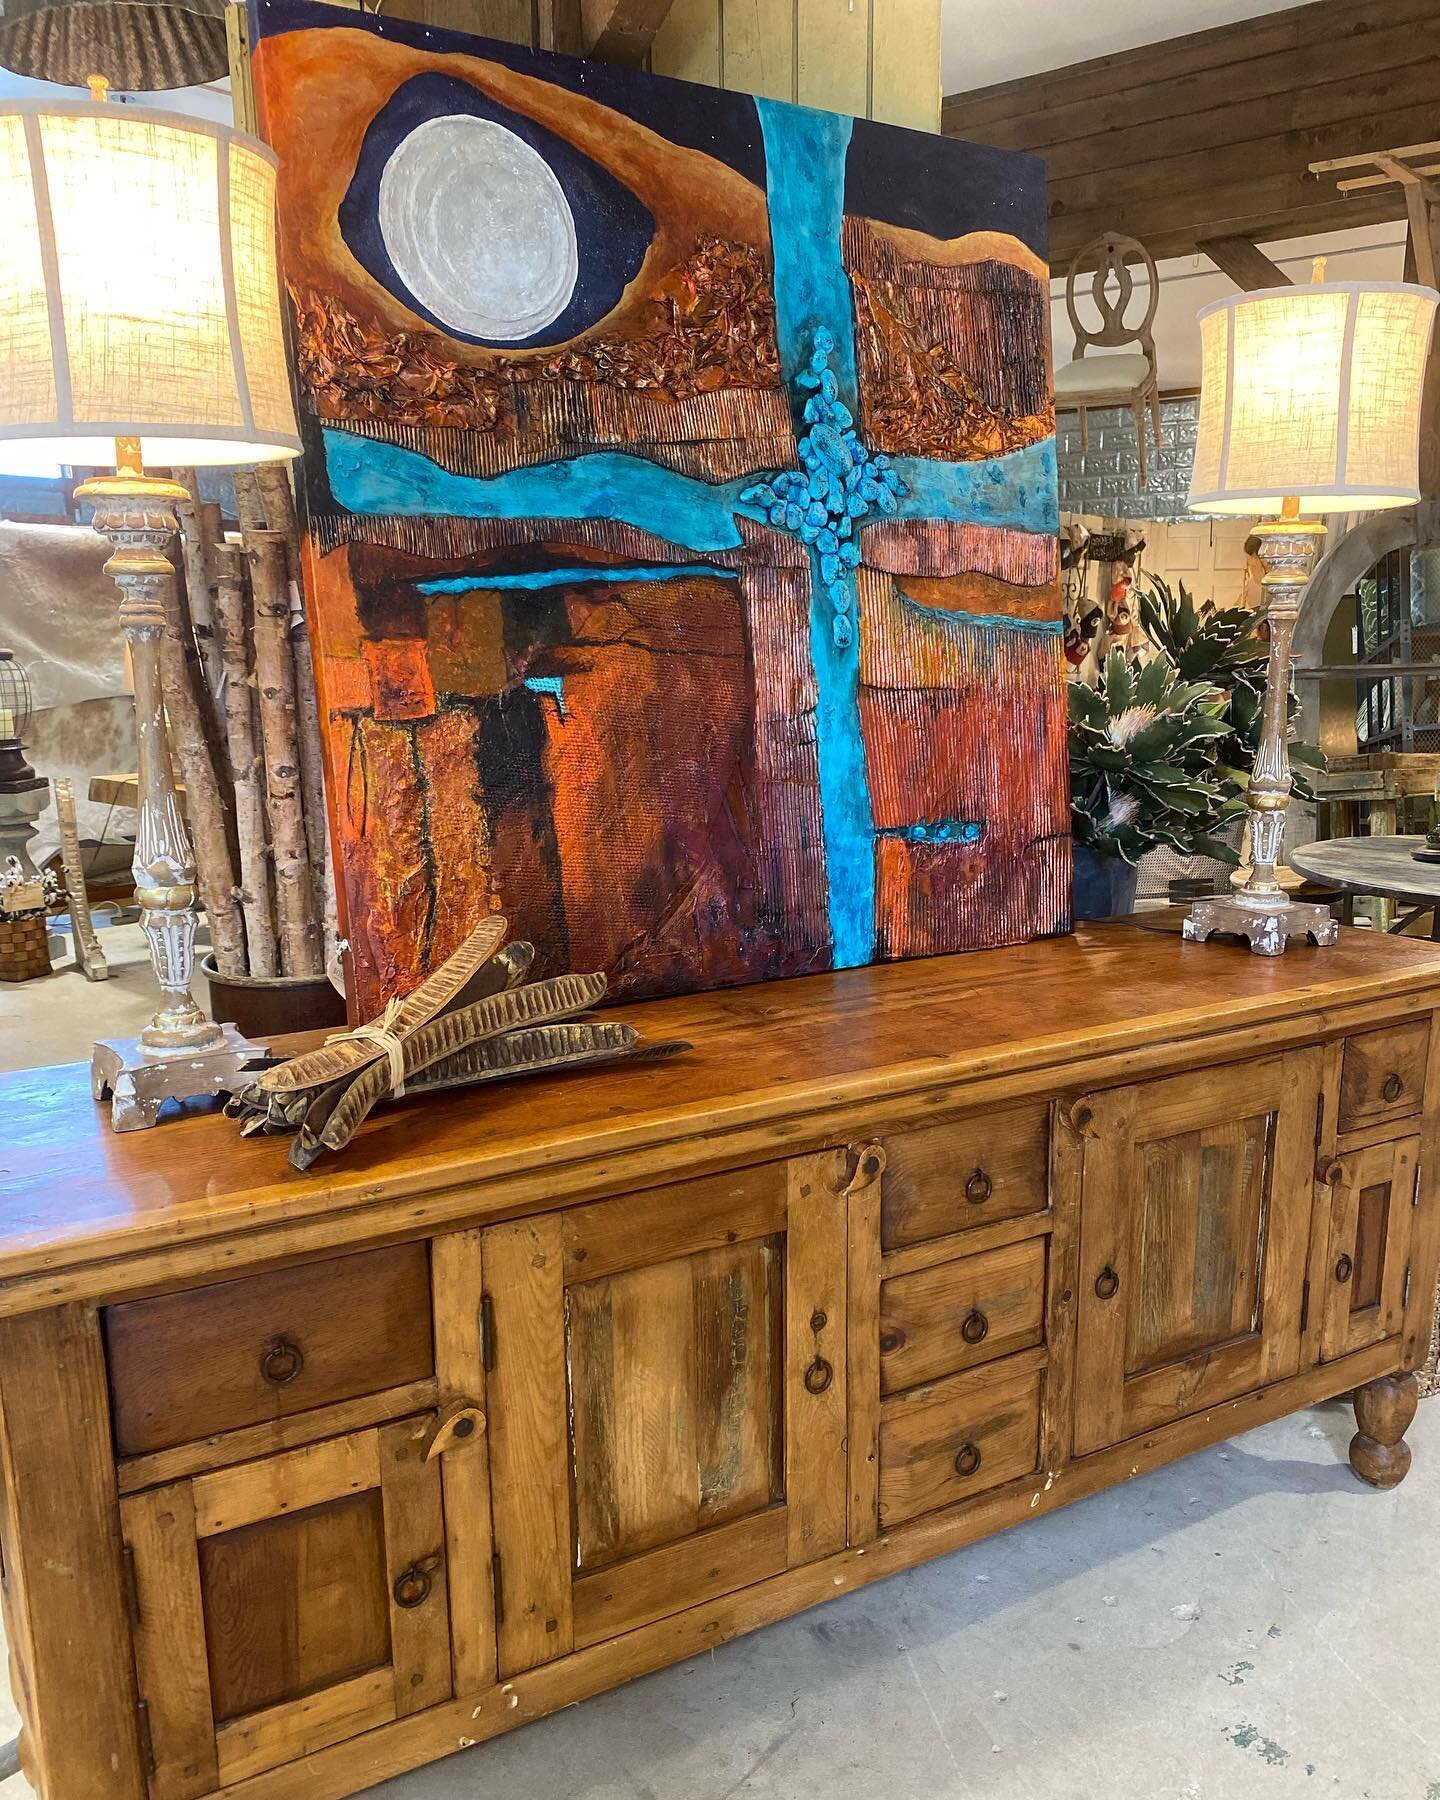 This original multimedia acrylic art piece was composed by local artist William Alexander, retired college administrator.  It is called &ldquo;Sedona Moon&rdquo;, and measures approximately 4&lsquo; x 4&lsquo;. 

We&rsquo;re open Mon-Fri 10-5, Sat 10